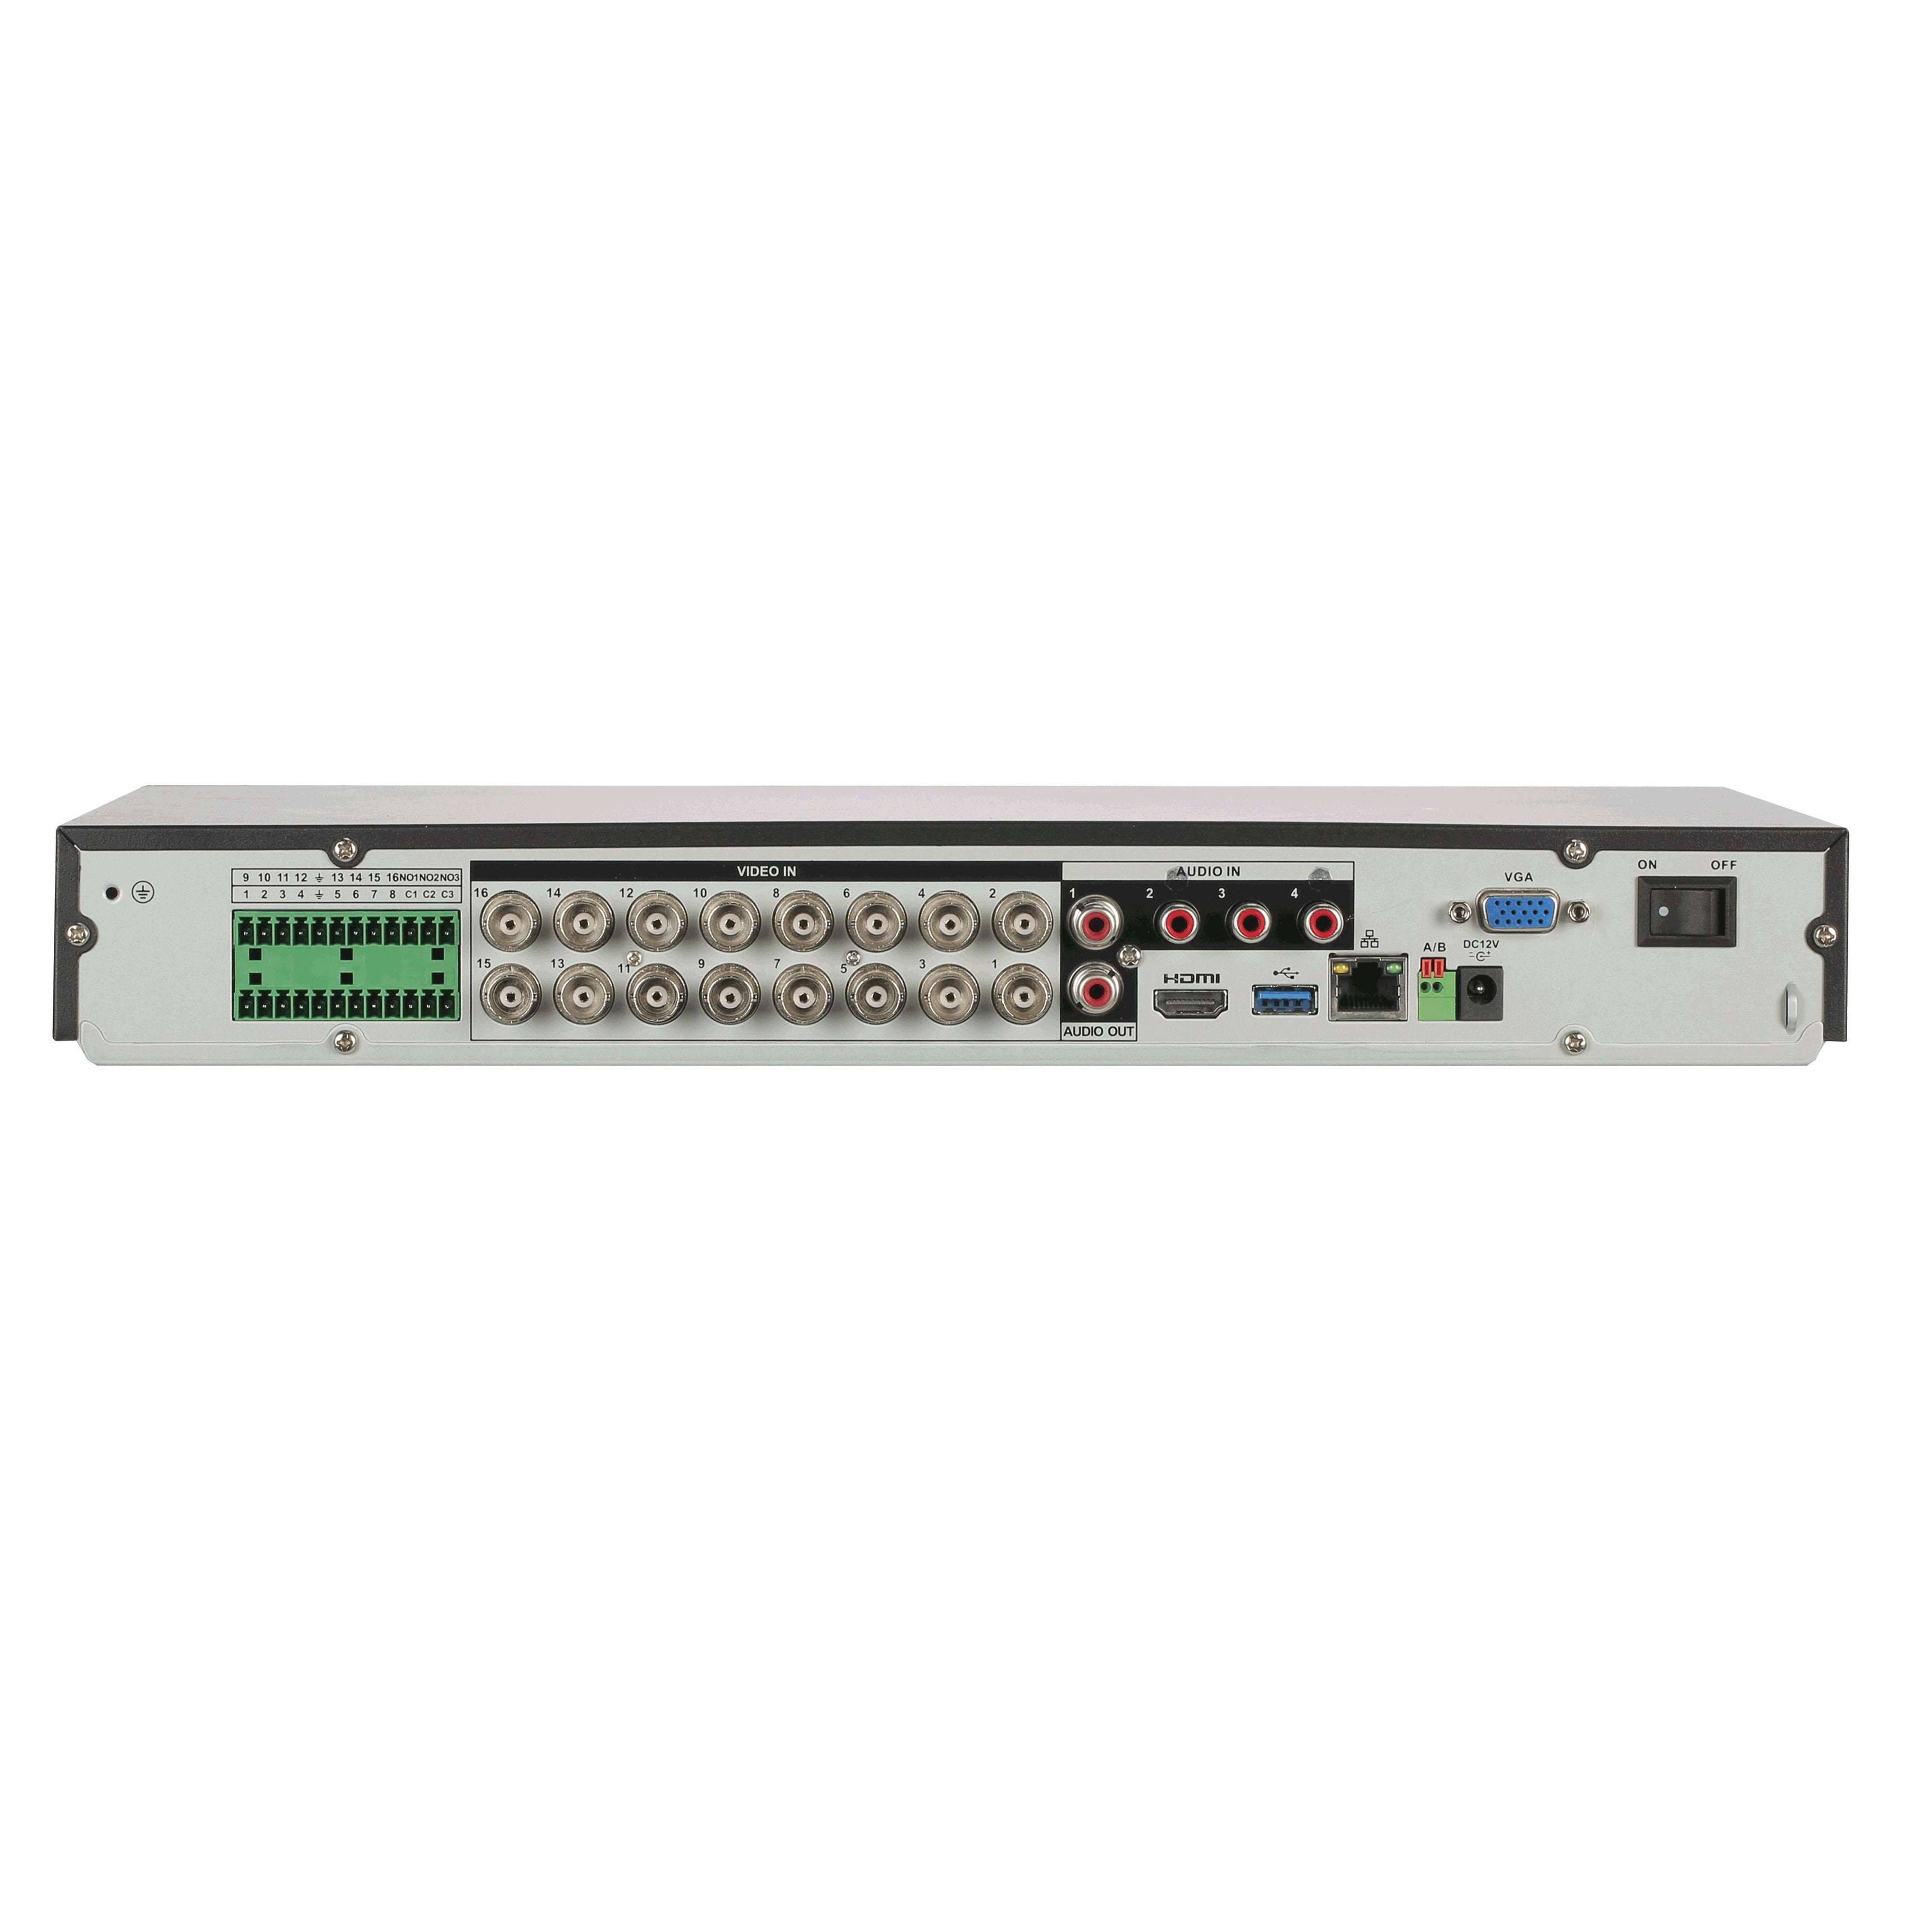 Dahua 16 Channel WizSense Series Penta-Brid 1RU XVR, H.265+, HDCVI / AHD / TVI / CVBS / IP Inputs, Max 32CH IP Up To 8MP, 128Mbps, SMD Plus, Face Recognition, Perimeter Arm / Disarm, 2 x HDD **NO HDD INSTALLED**